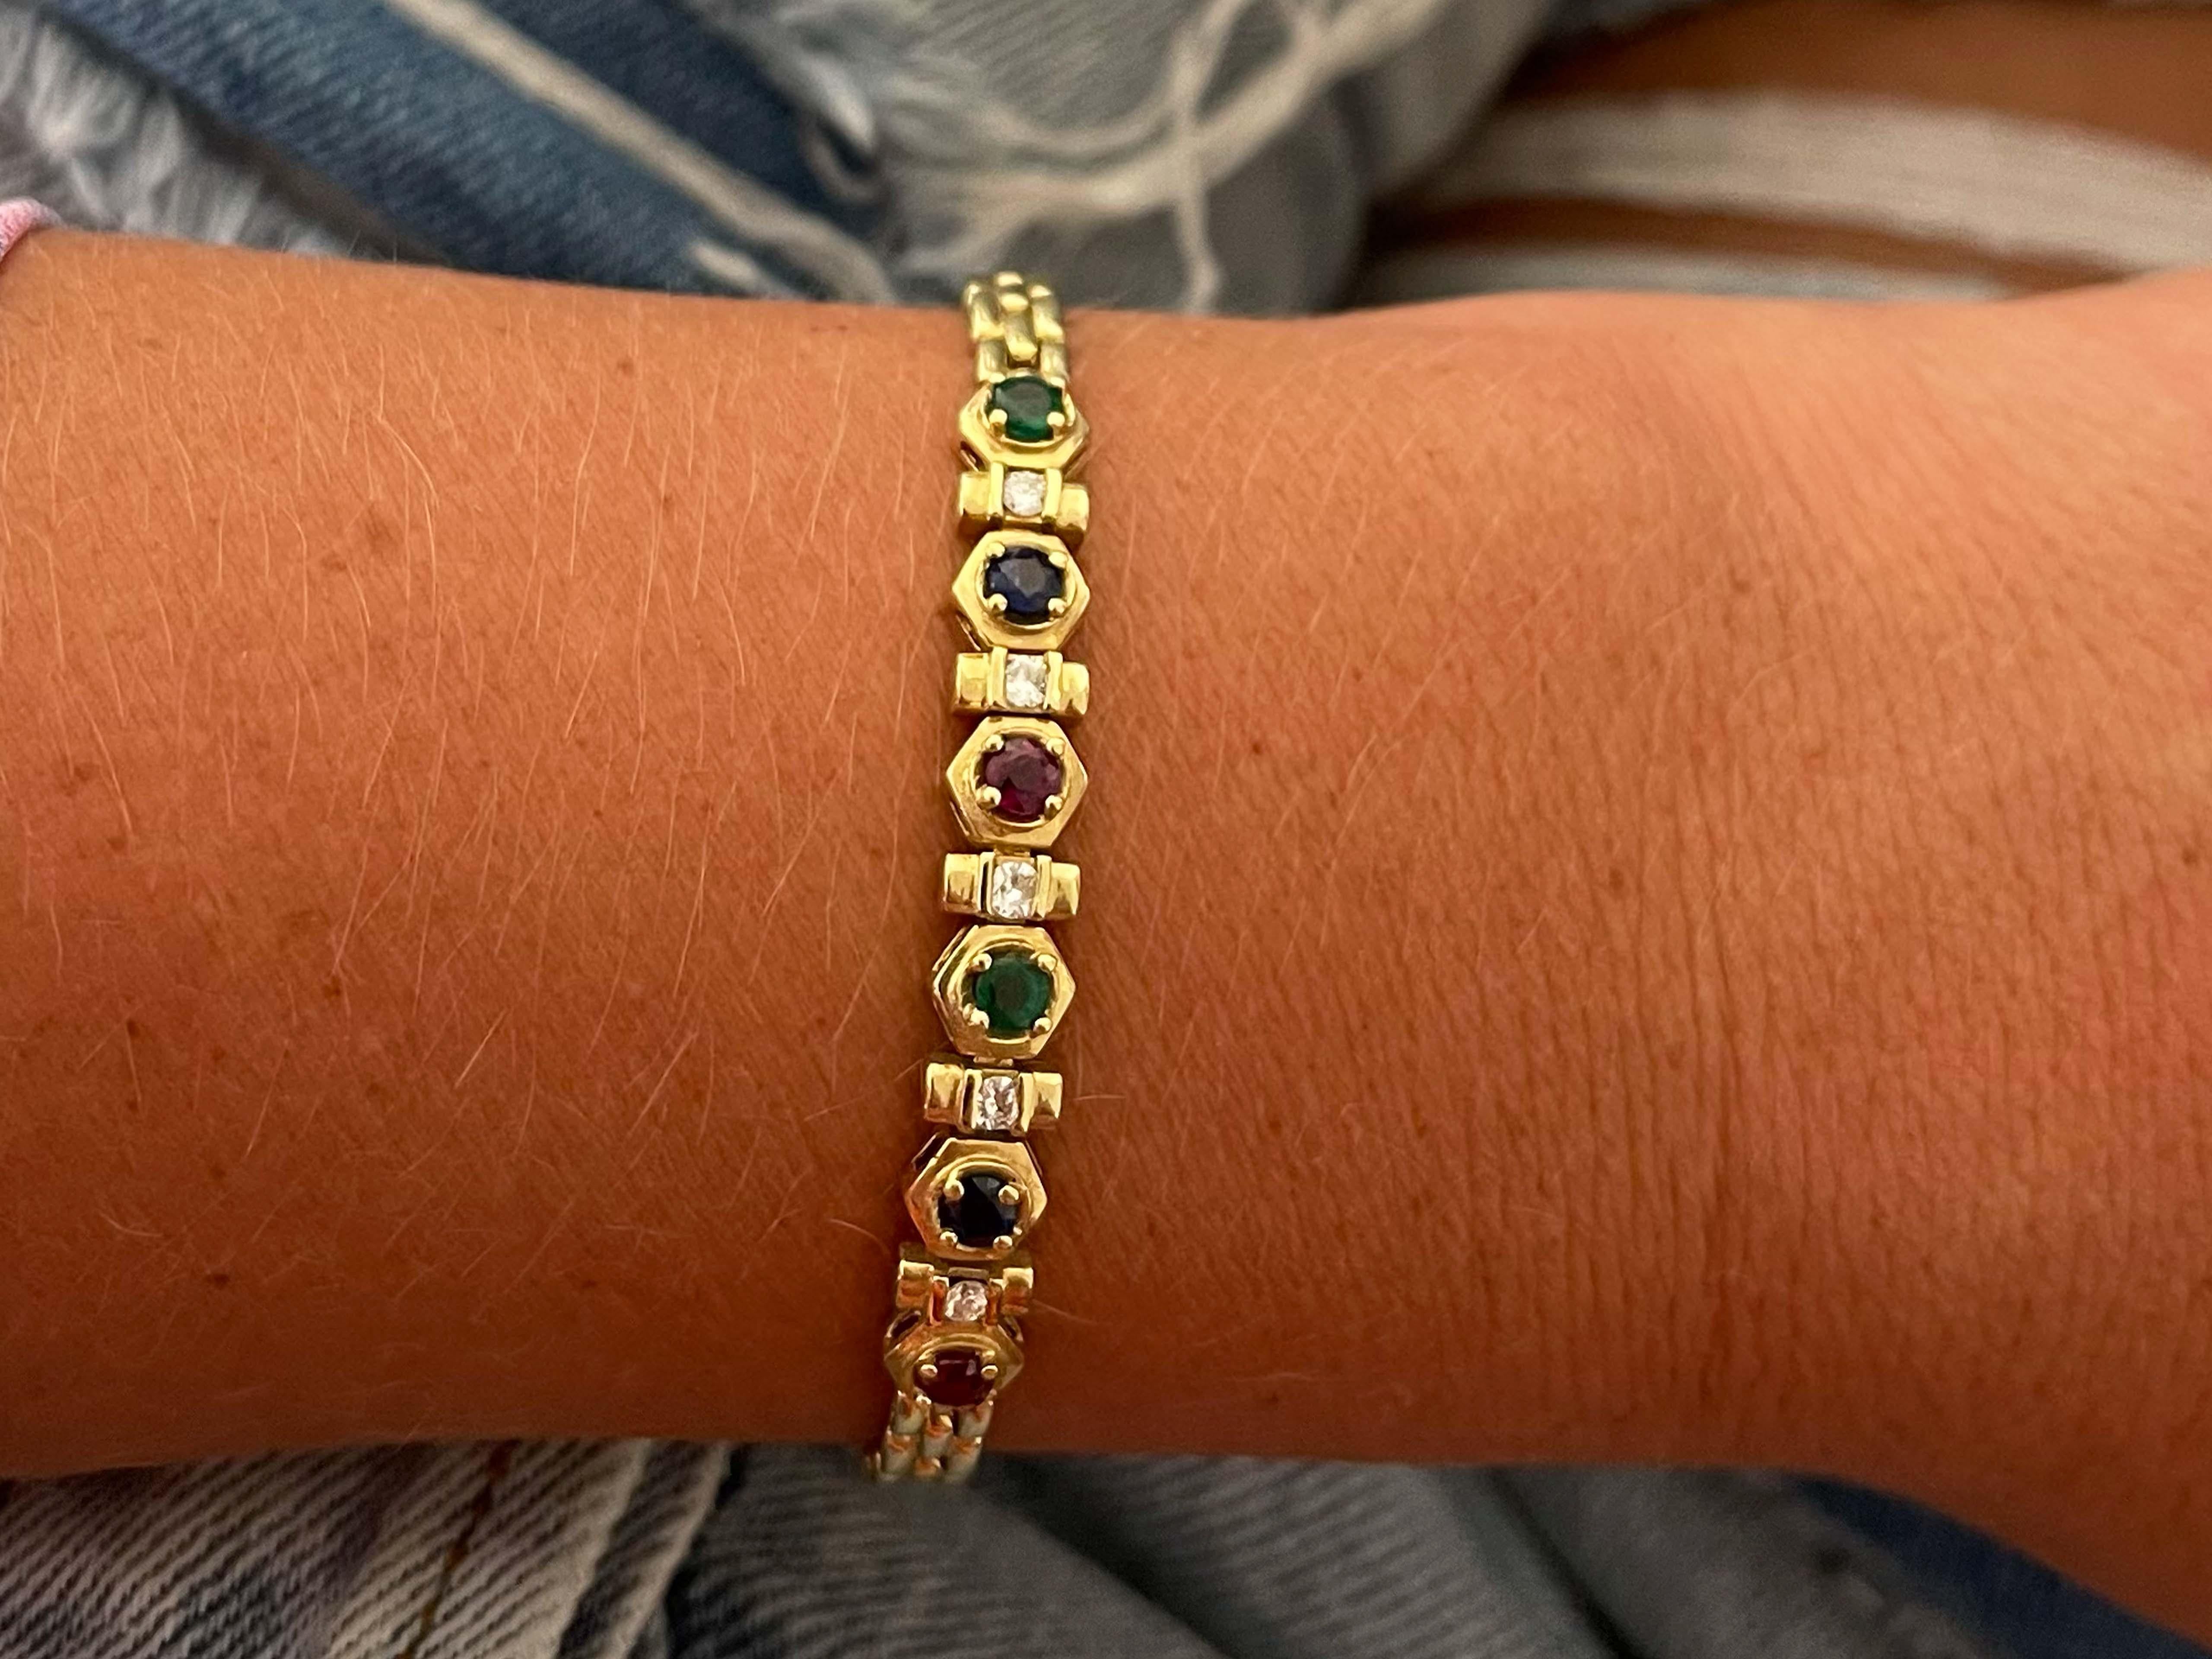 Bracelet Specifications:

Metal: 18k Yellow Gold

Gemstones: 2 red rubies, 2 green emeralds and 2 blue sapphires

Gemstones Total Carat Weight: ~0.60 carats

Diamond Count: 5

Diamond Carat Weight: 0.25

Diamond Color: H

Diamond Clarity: